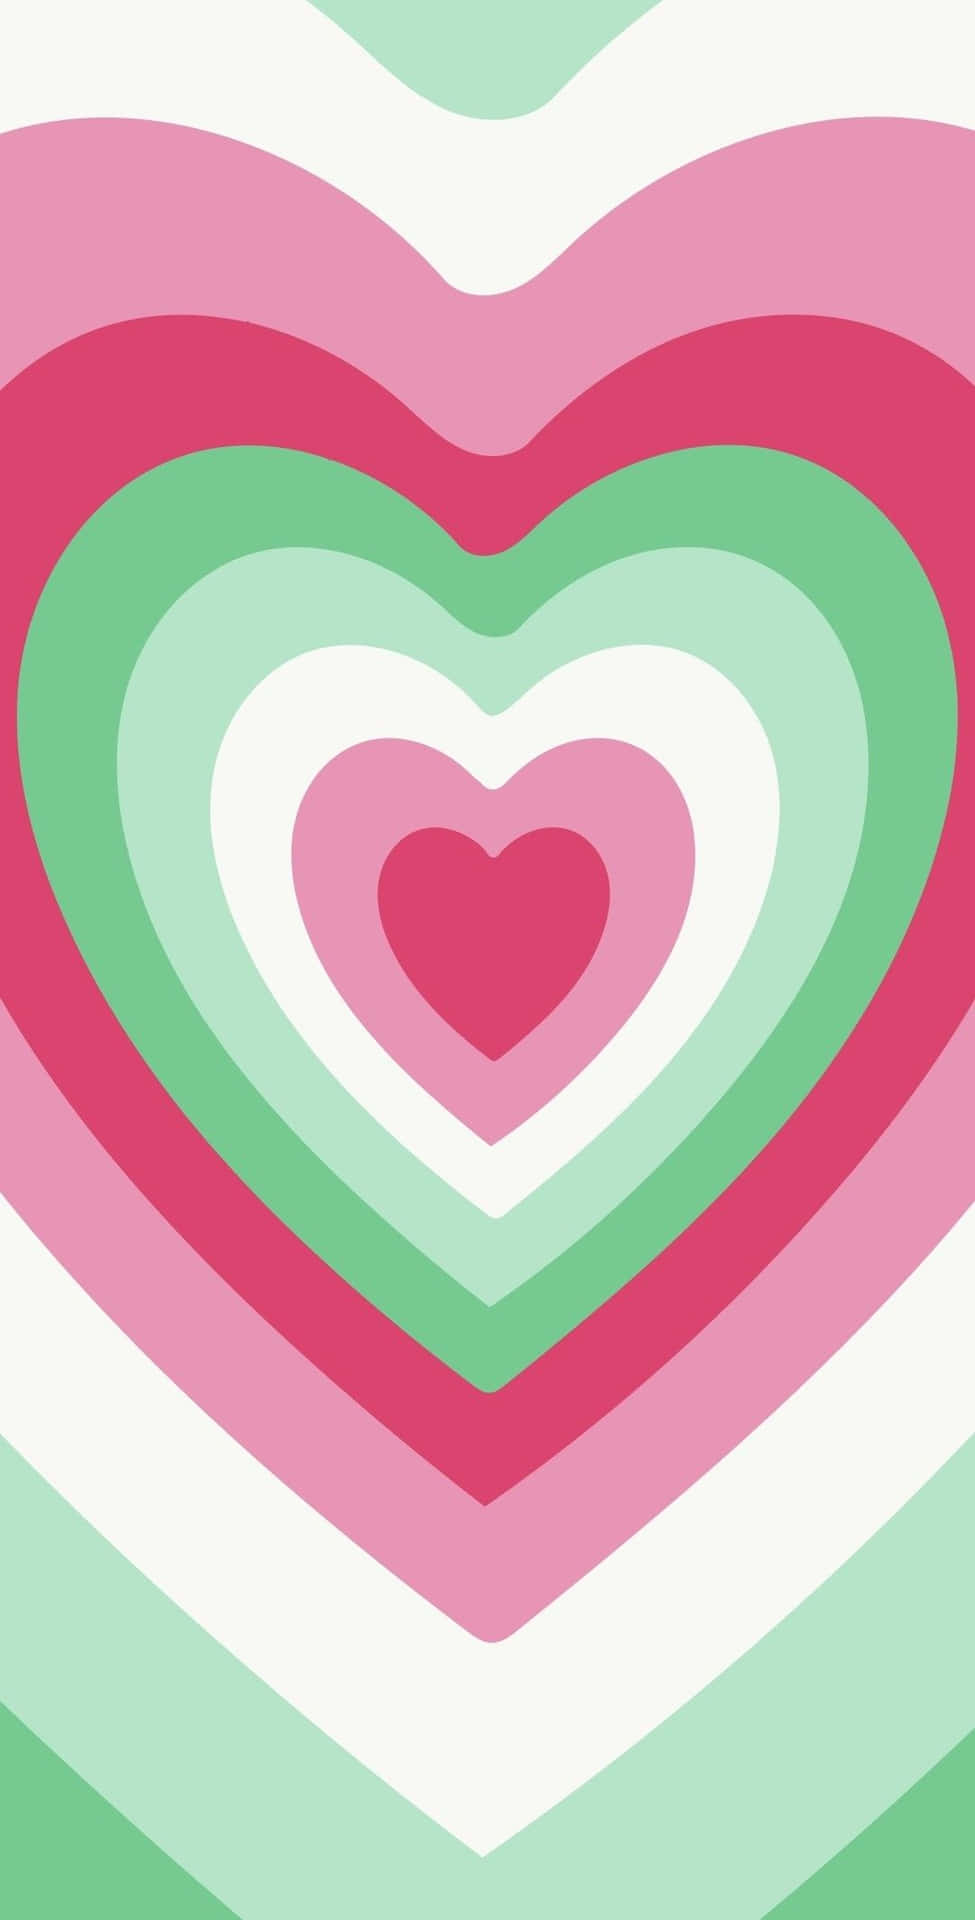 A cool image of four mint green hearts overlapping in a playful way. Wallpaper